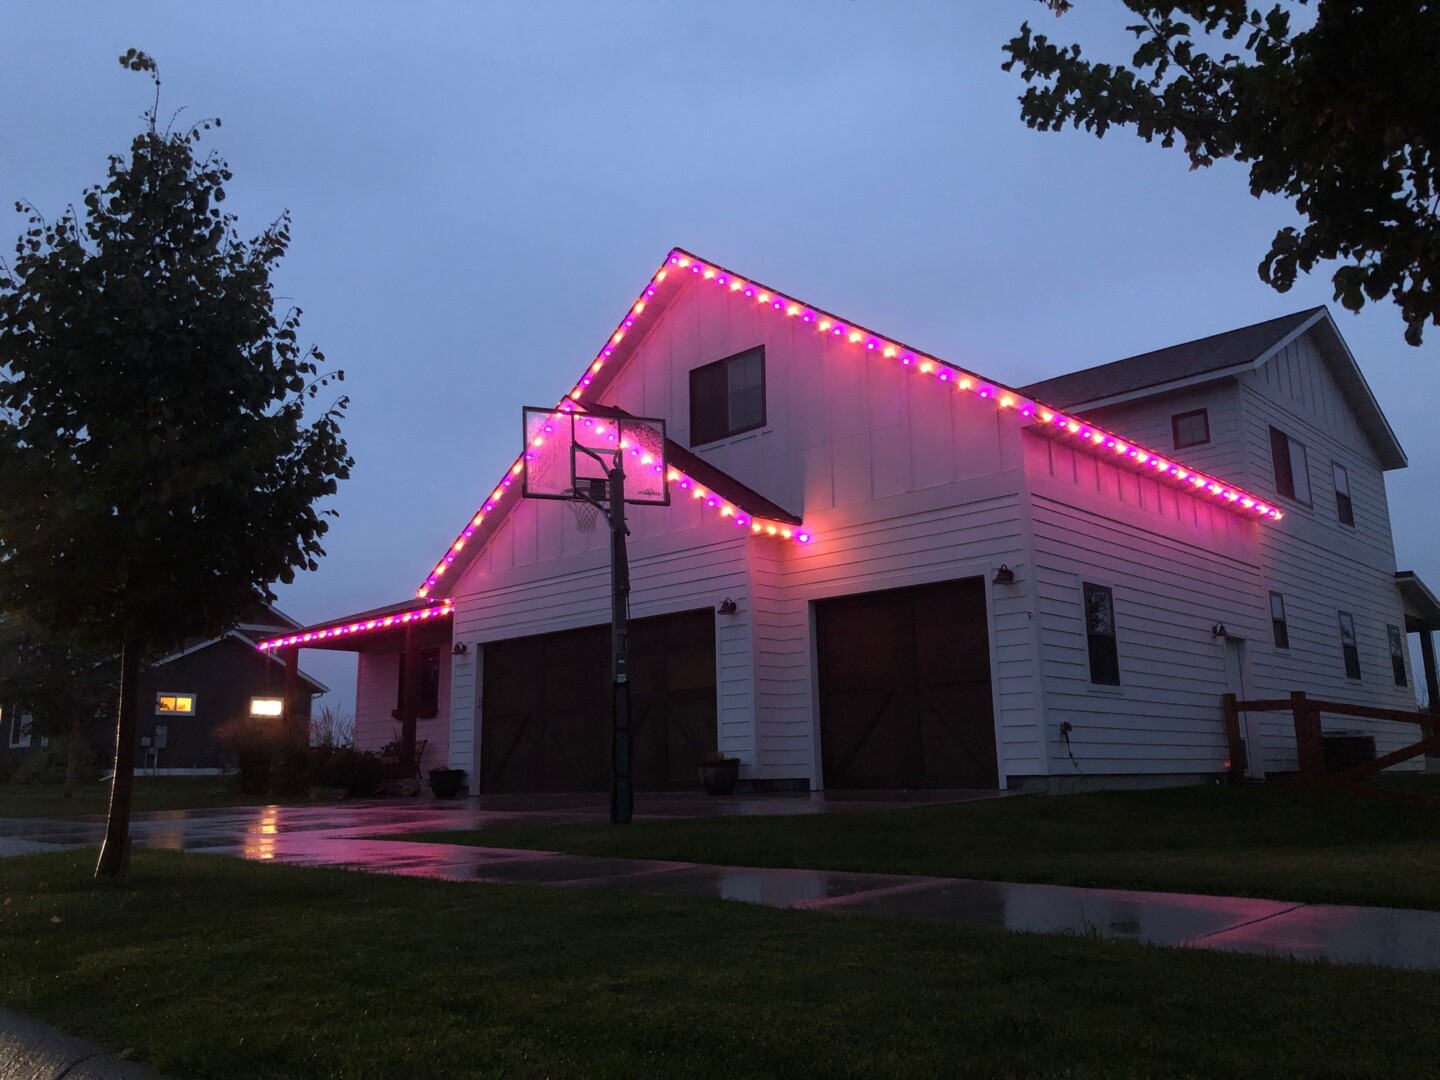 How To Install Holiday Lights On a Roof